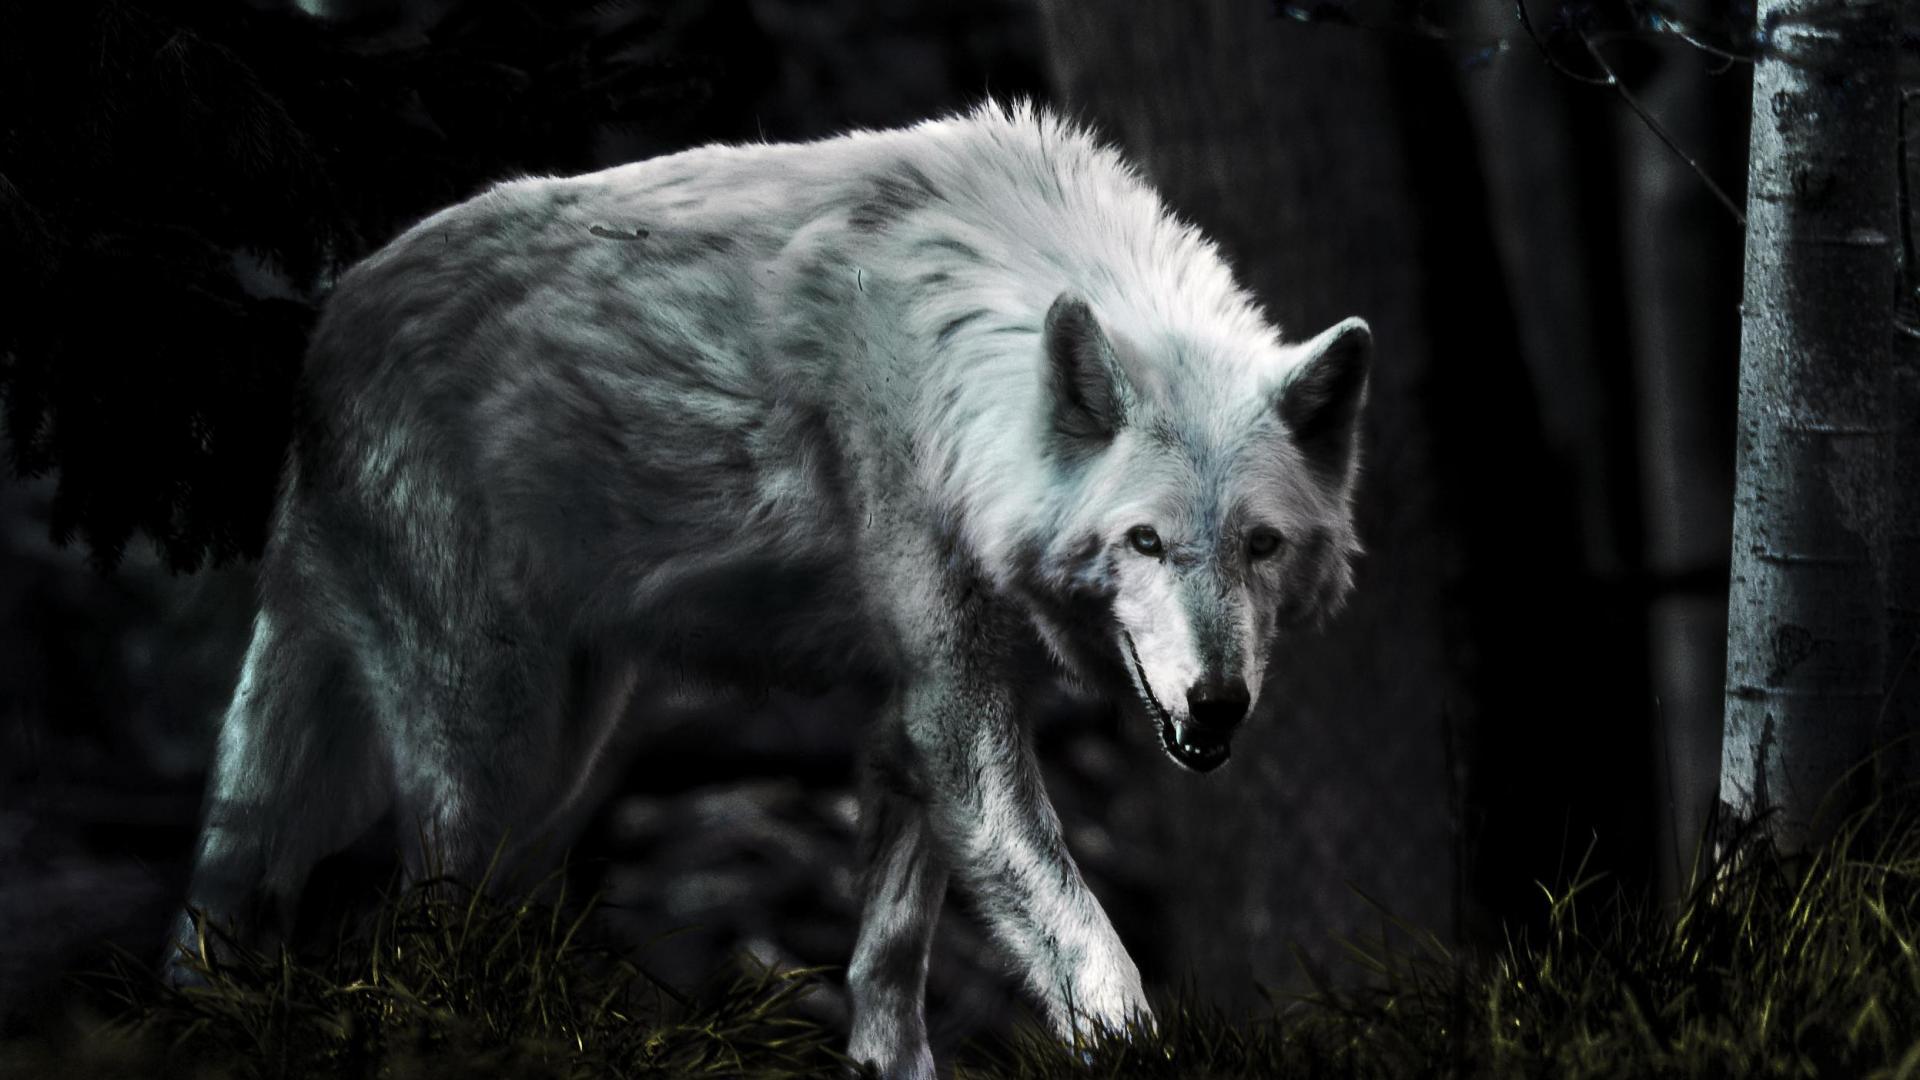 Lone Wolf Wallpapers - Wallpaper Cave